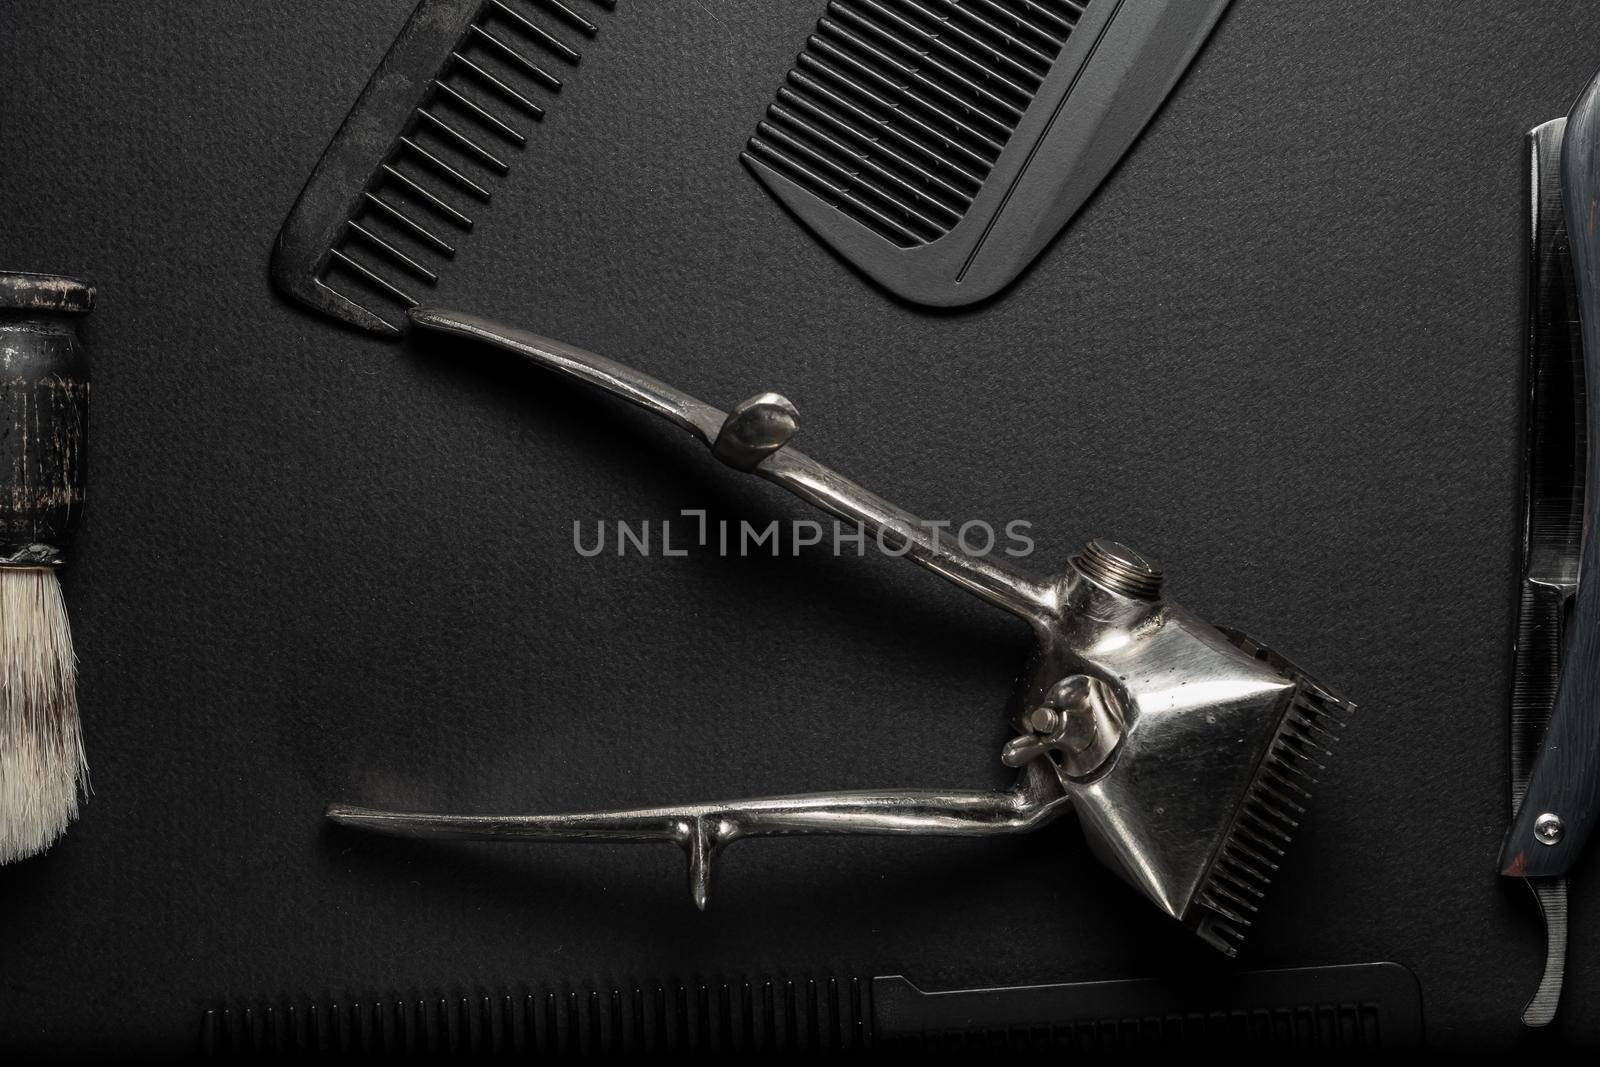 On a black surface are old hairdresser tools. vintage hand-held hair clipper, hairdressing scissors, combs, razor, shaving brush. black monochrome. horizontal orientation. top view flat ley